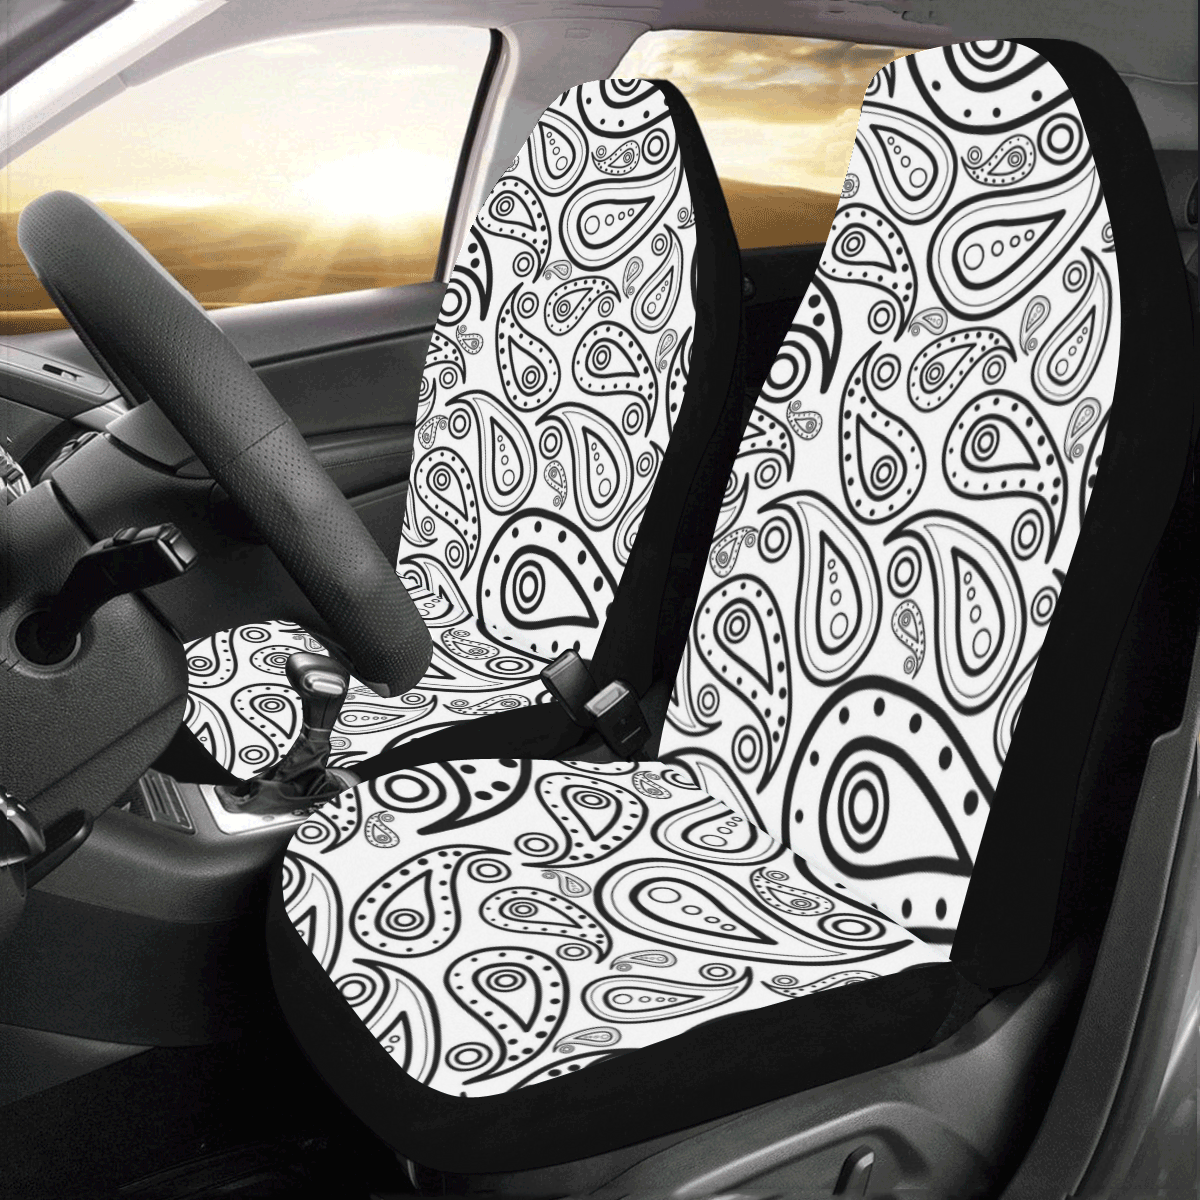 black and white paisley Car Seat Covers (Set of 2)